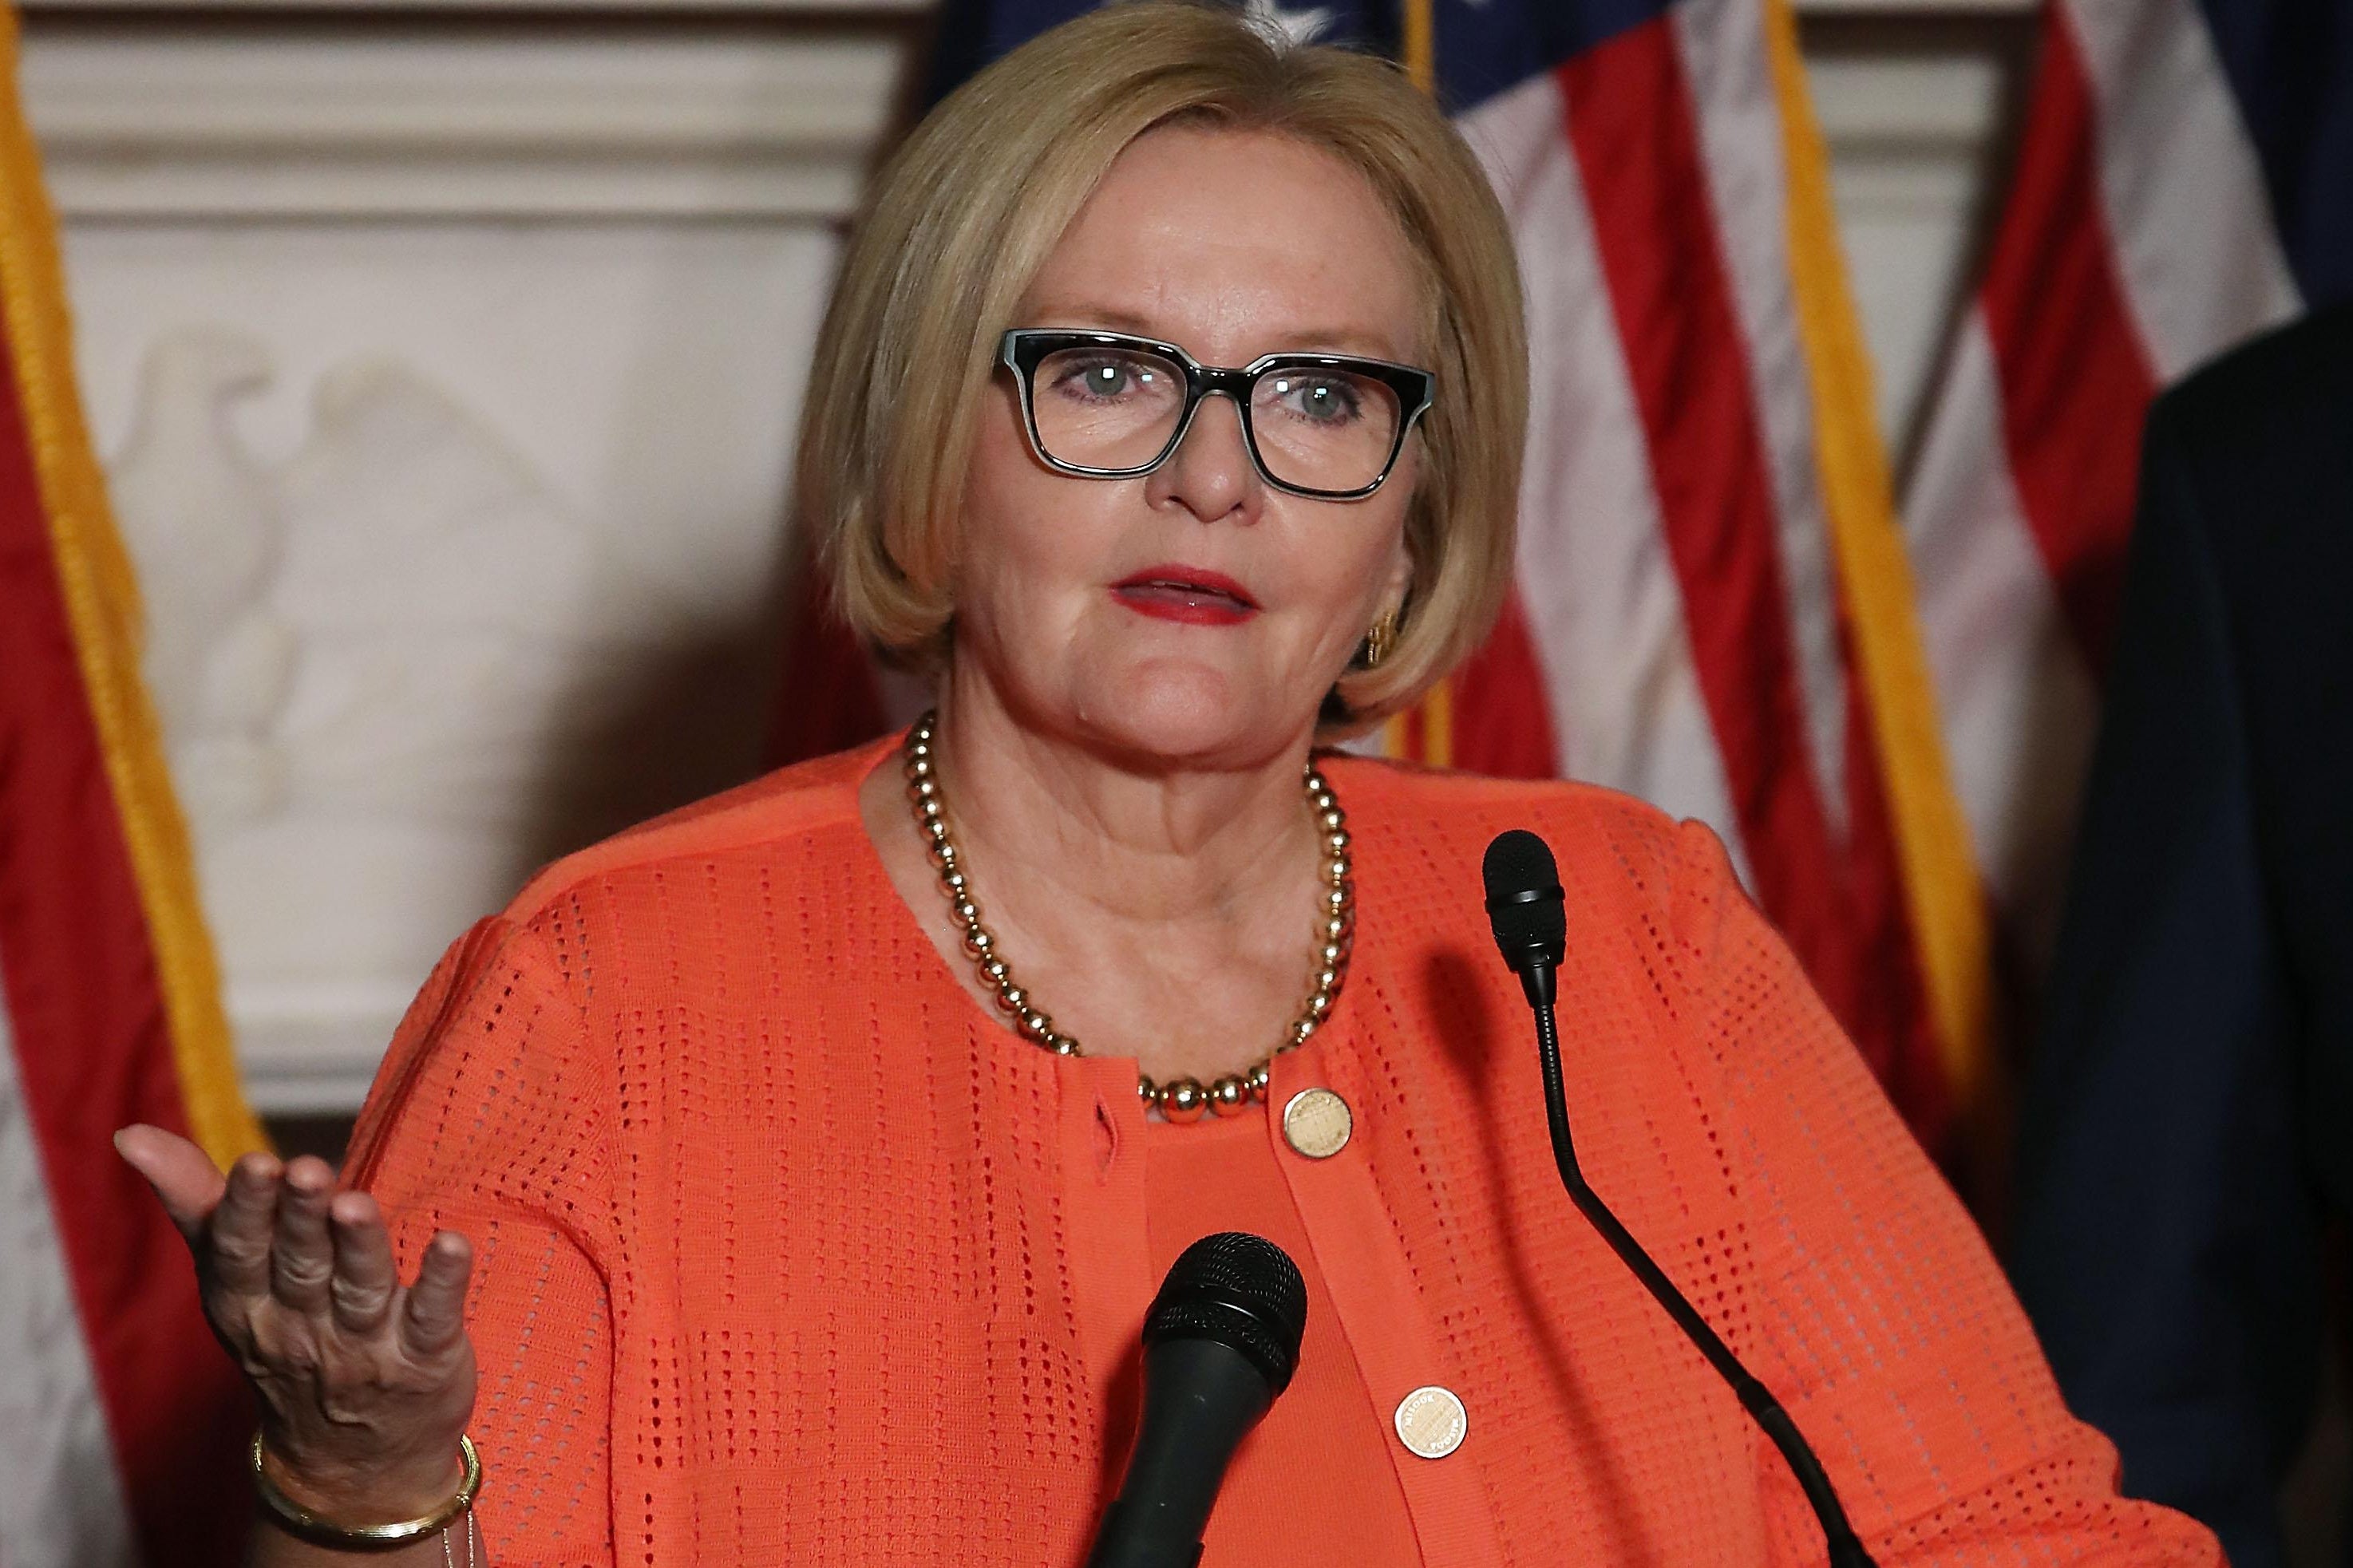 Sen. Claire McCaskill gestures with her right hand while speaking into a microphone during a news conference on Capitol Hill.